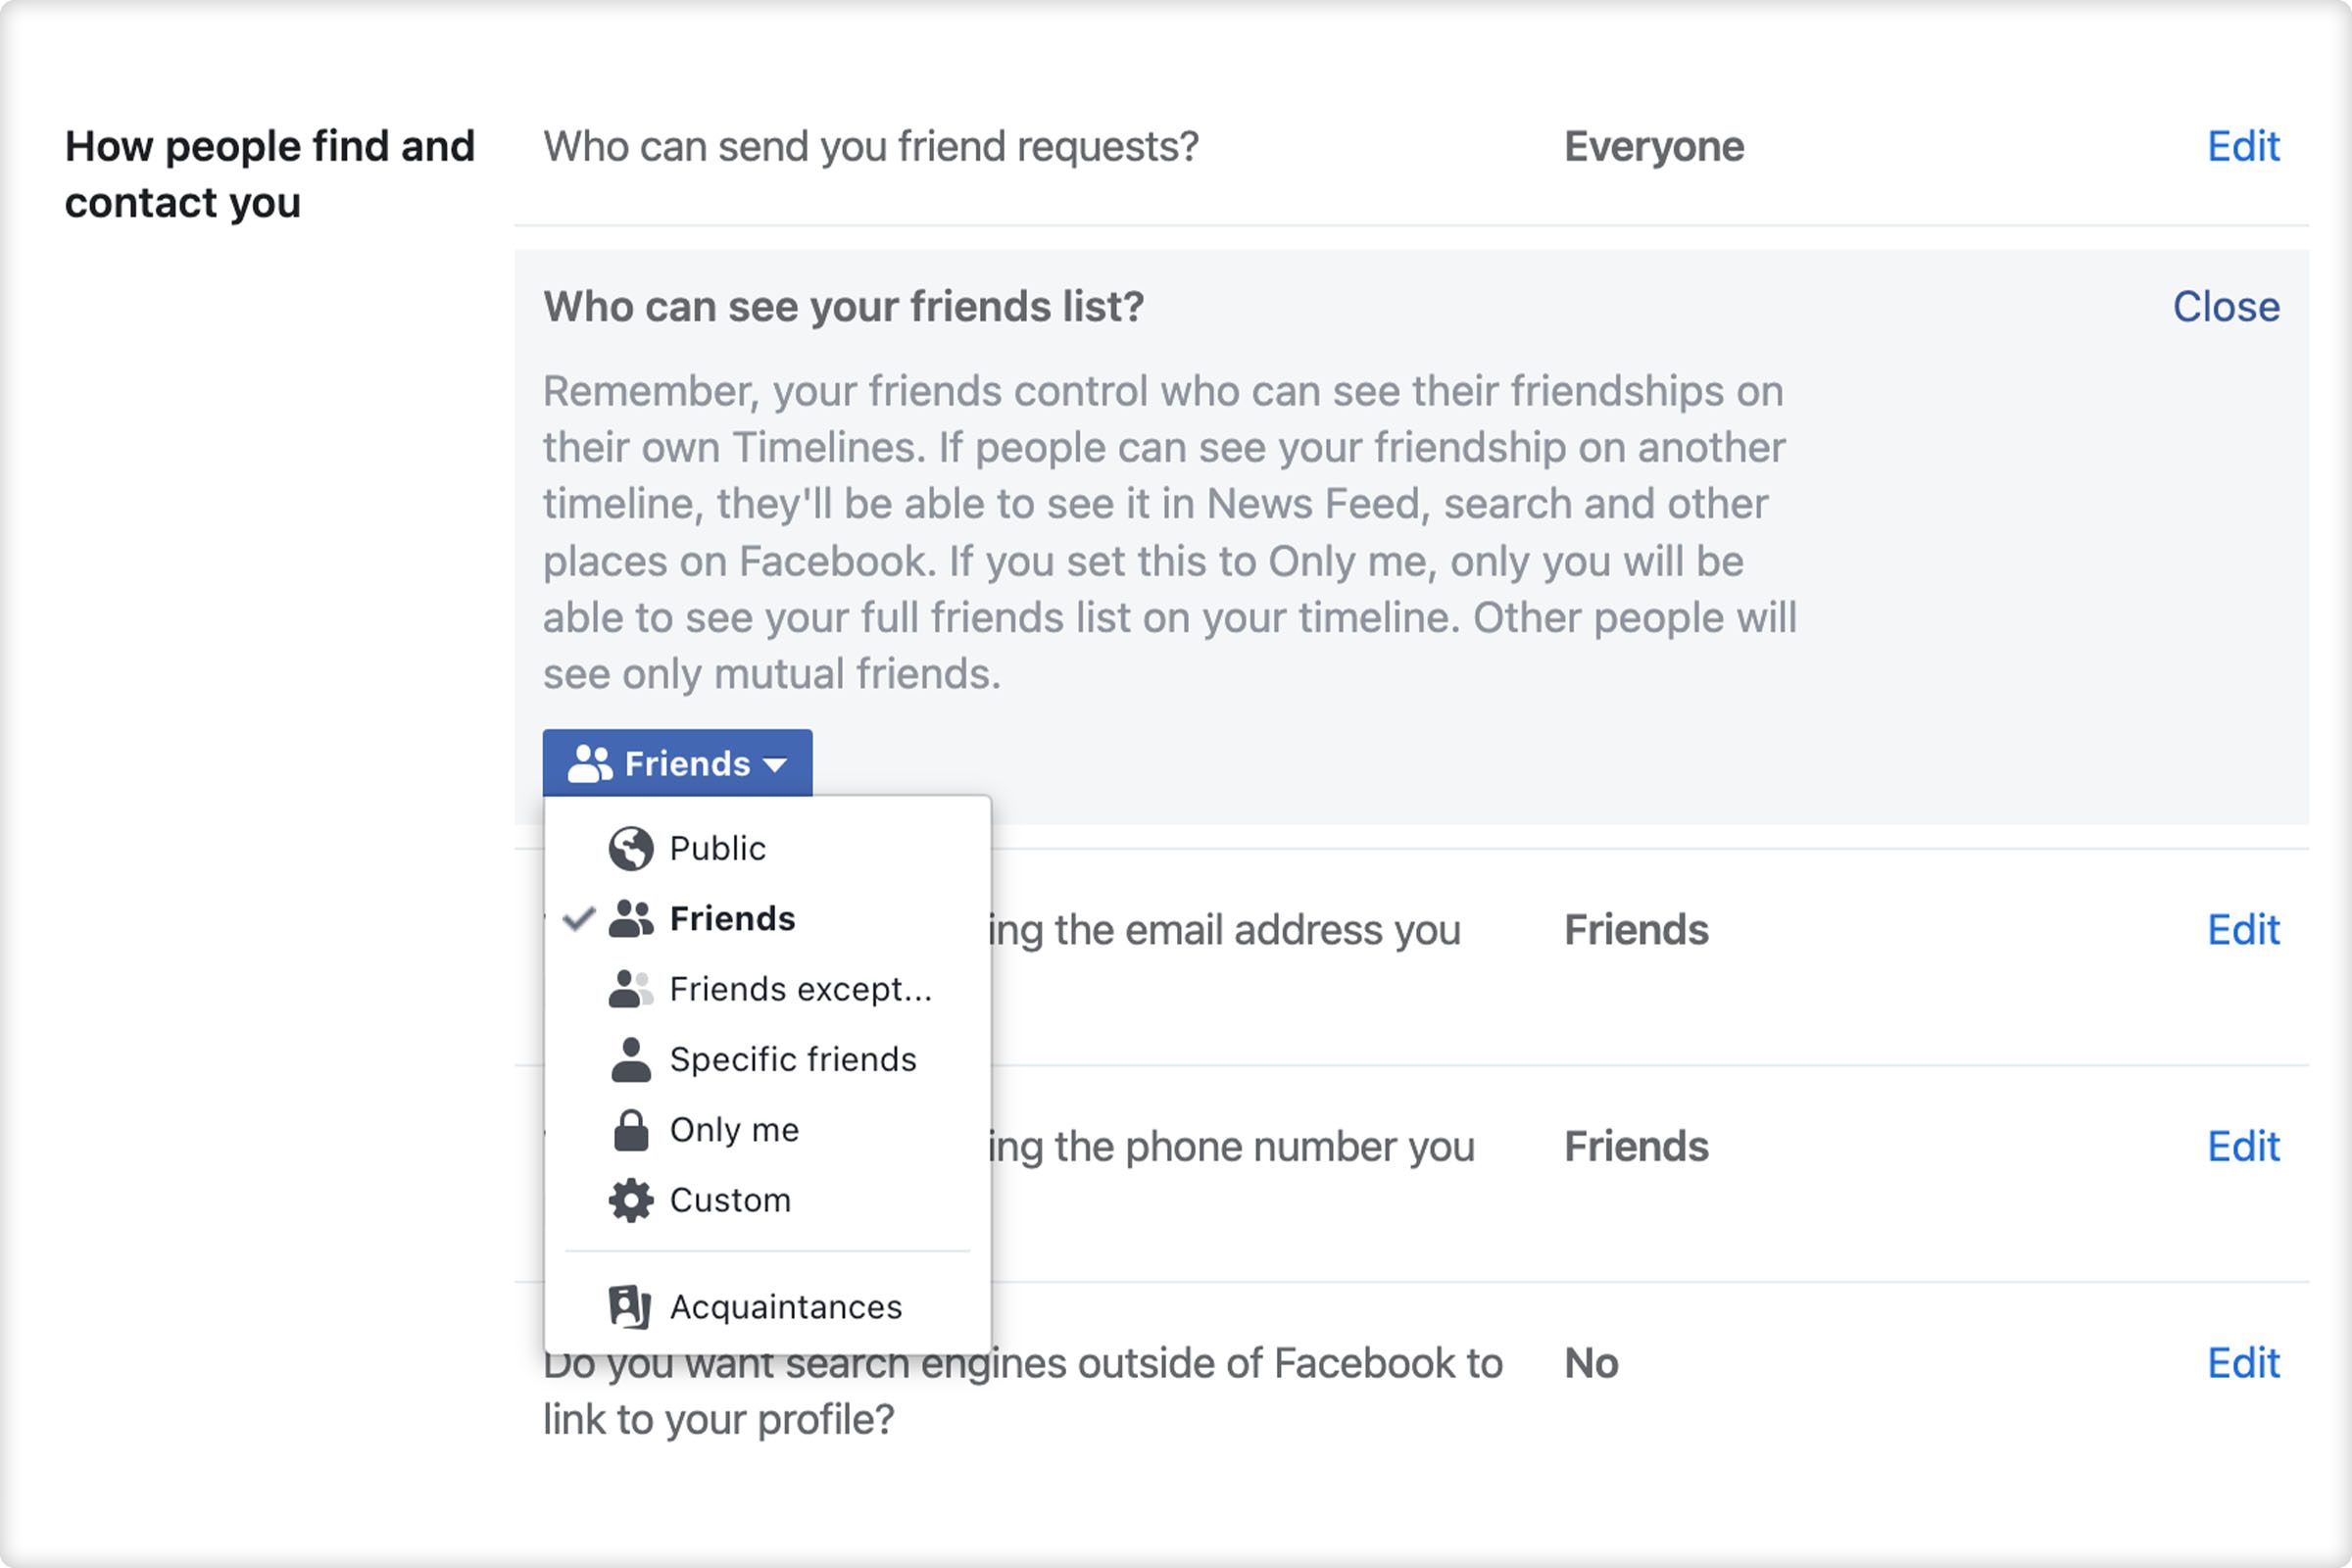 How to Hide Friends List on Facebook From Certain People